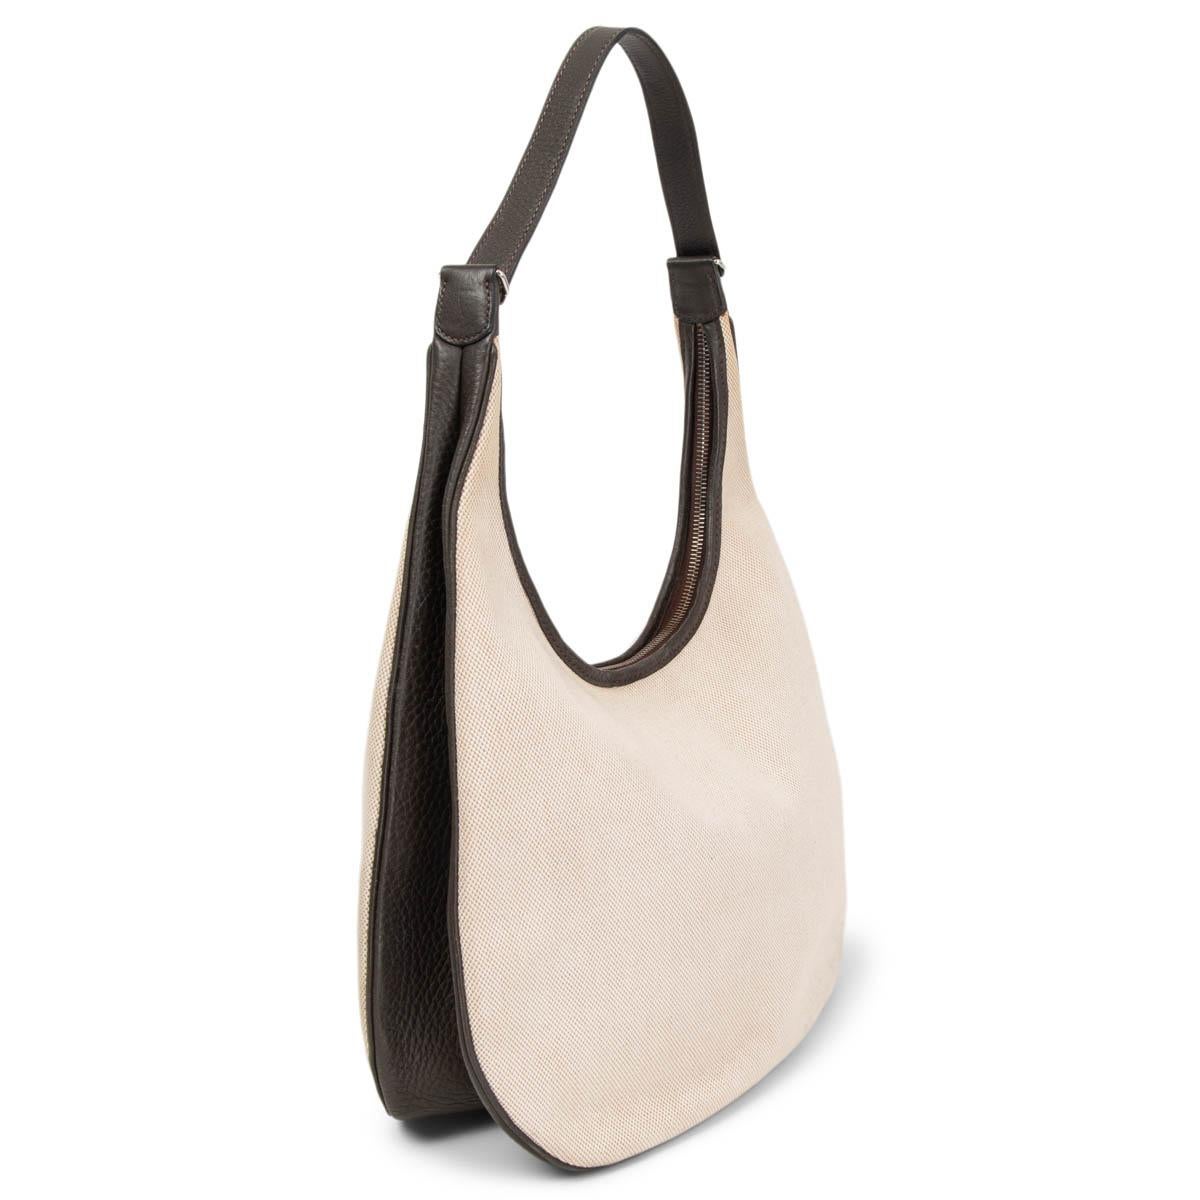 100% authentic Hermès Goa Hobo Bag in Ecur (off-white) Toile H canvas and Macassar (grey-brown) Taurillon Clemence leather. Opens with a zipper on top and is lined in off-white canvas with one zipper pocket against the back. Has been carried with